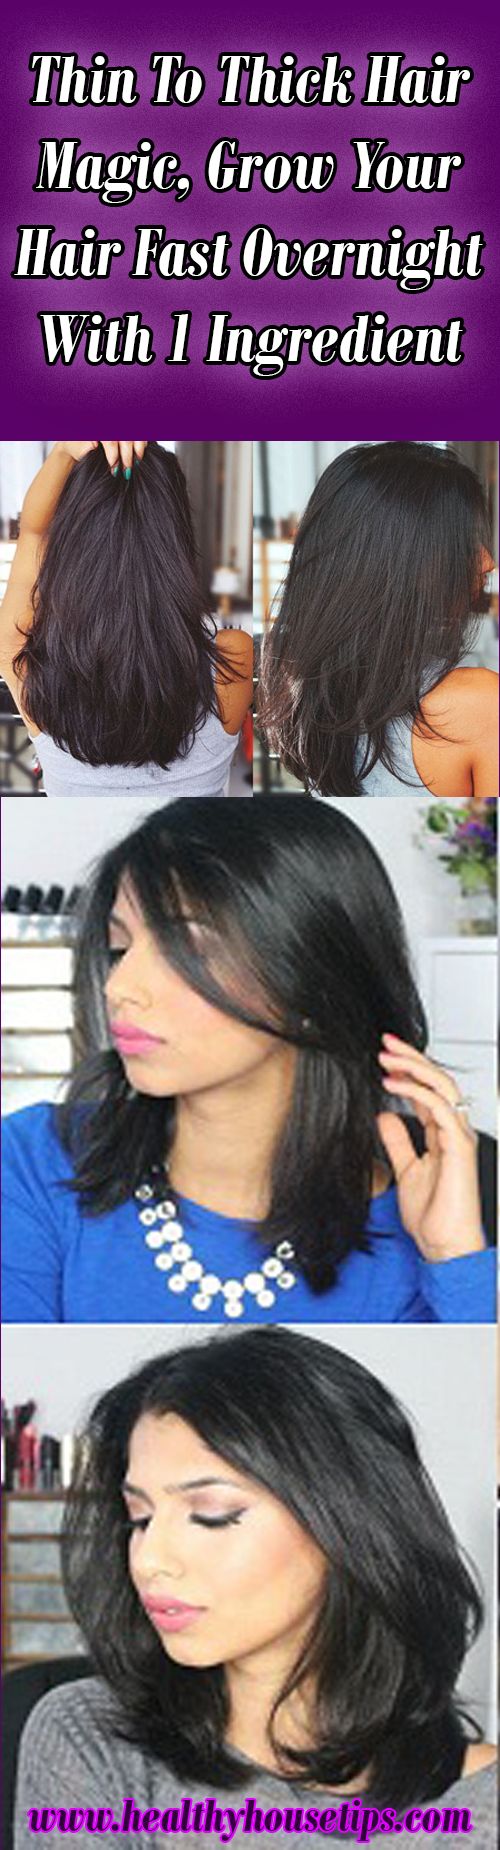 Thin To Thick Hair Magic Grow Your Hair Fast Overnight With 1 Ingredient Thin To Thick Hair Magic, Grow Your Hair Fast Overnight With 1 Ingredient